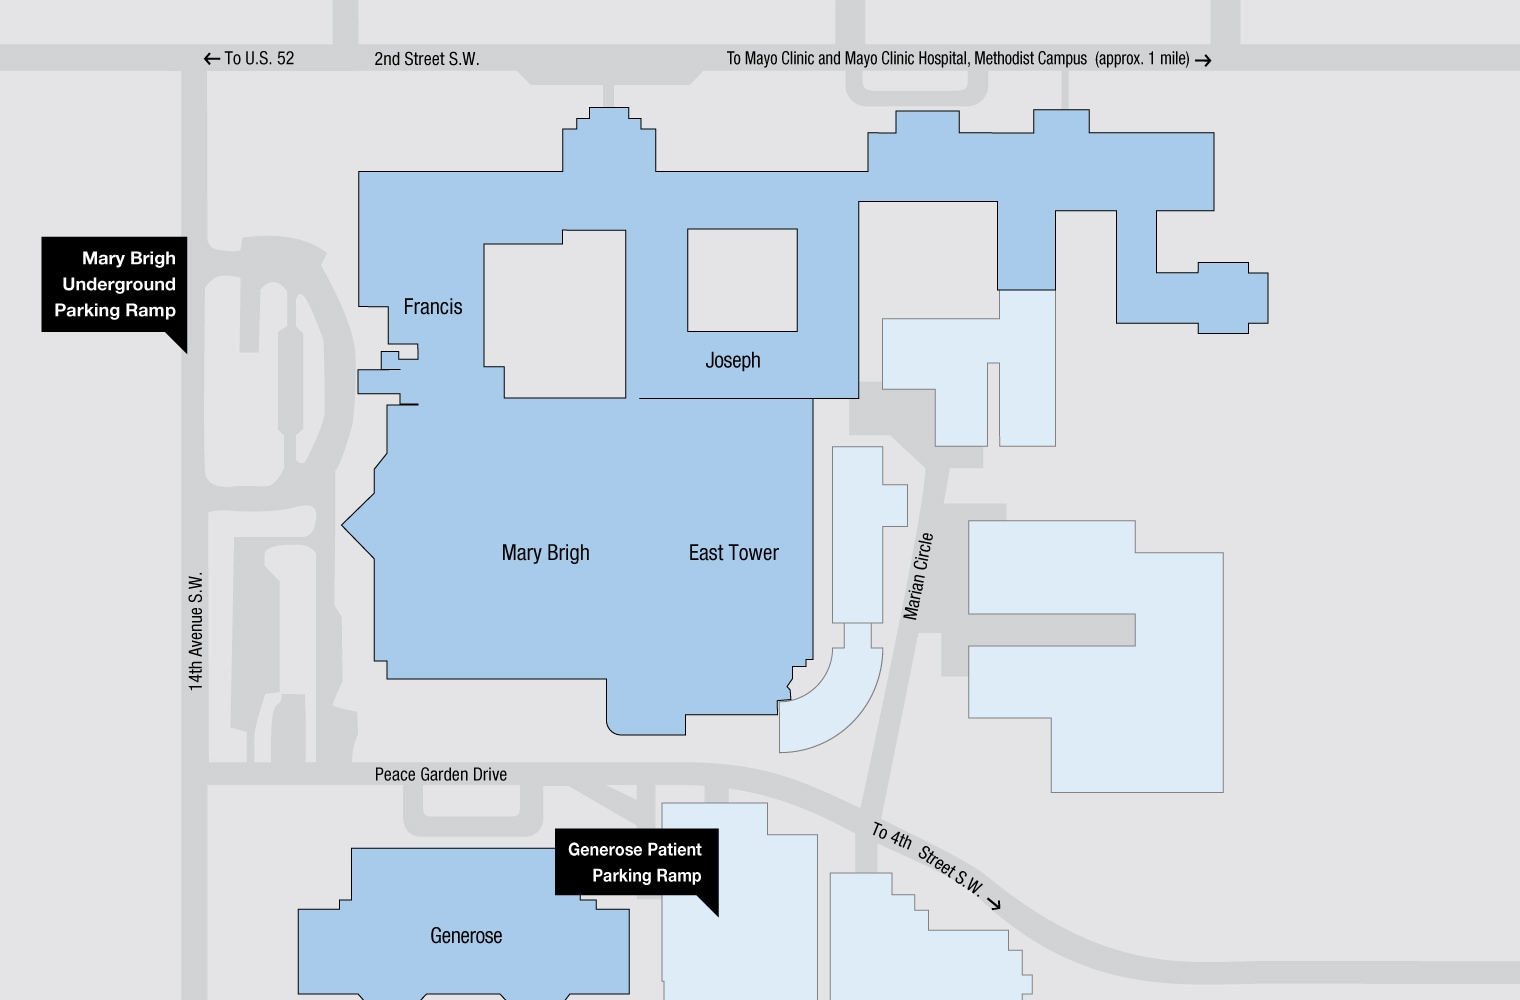 Parking map for Saint Marys Campus of Mayo Clinic in Rochester, Minnesota